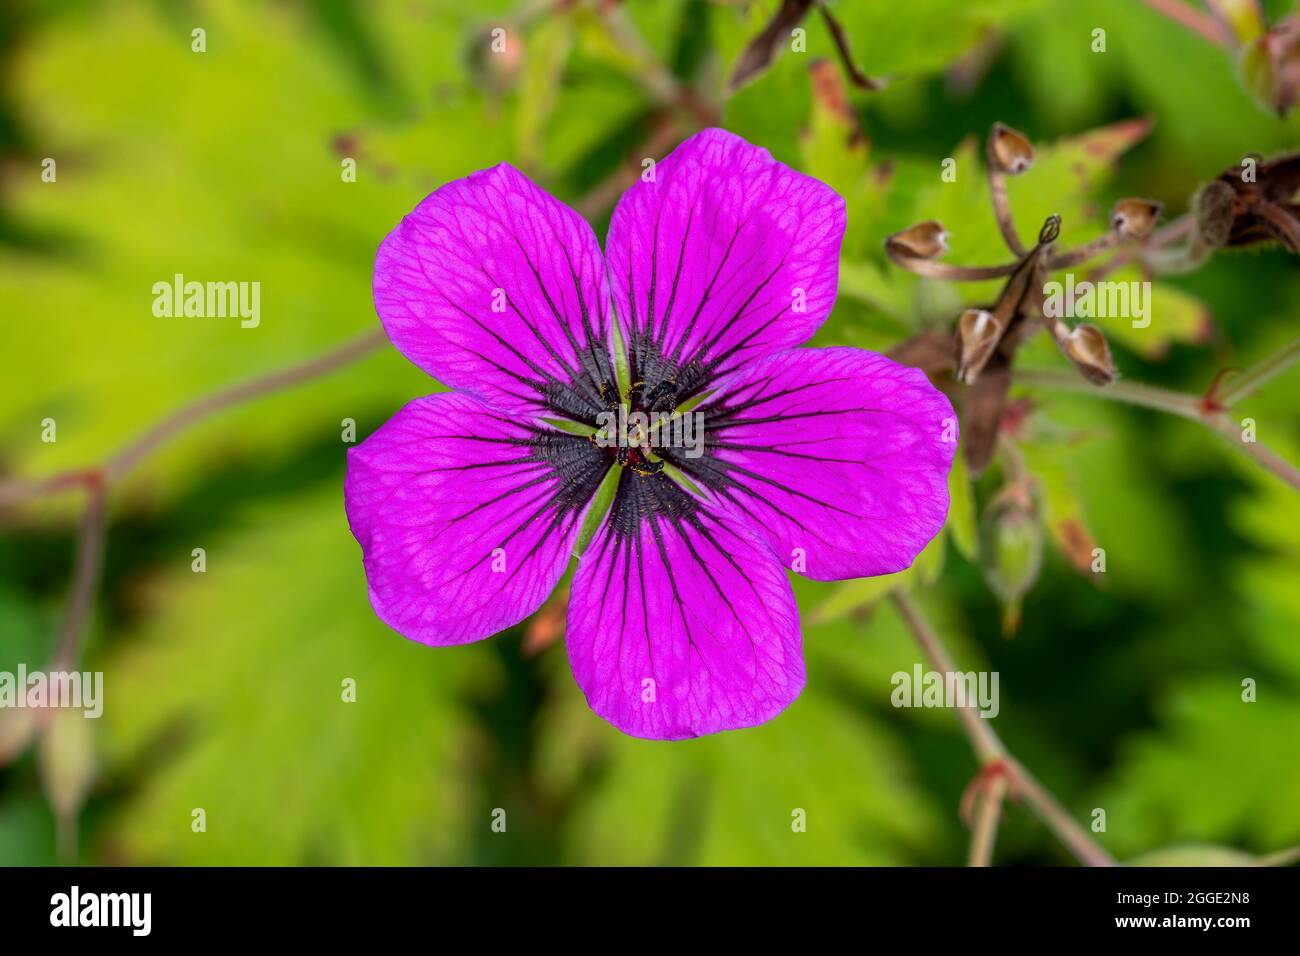 Geranium x Oxonianum 'Wageningen' a summer flowering plant with a pink purple summertime flower commonly known as meadow cranesbill, stock photo image Stock Photo